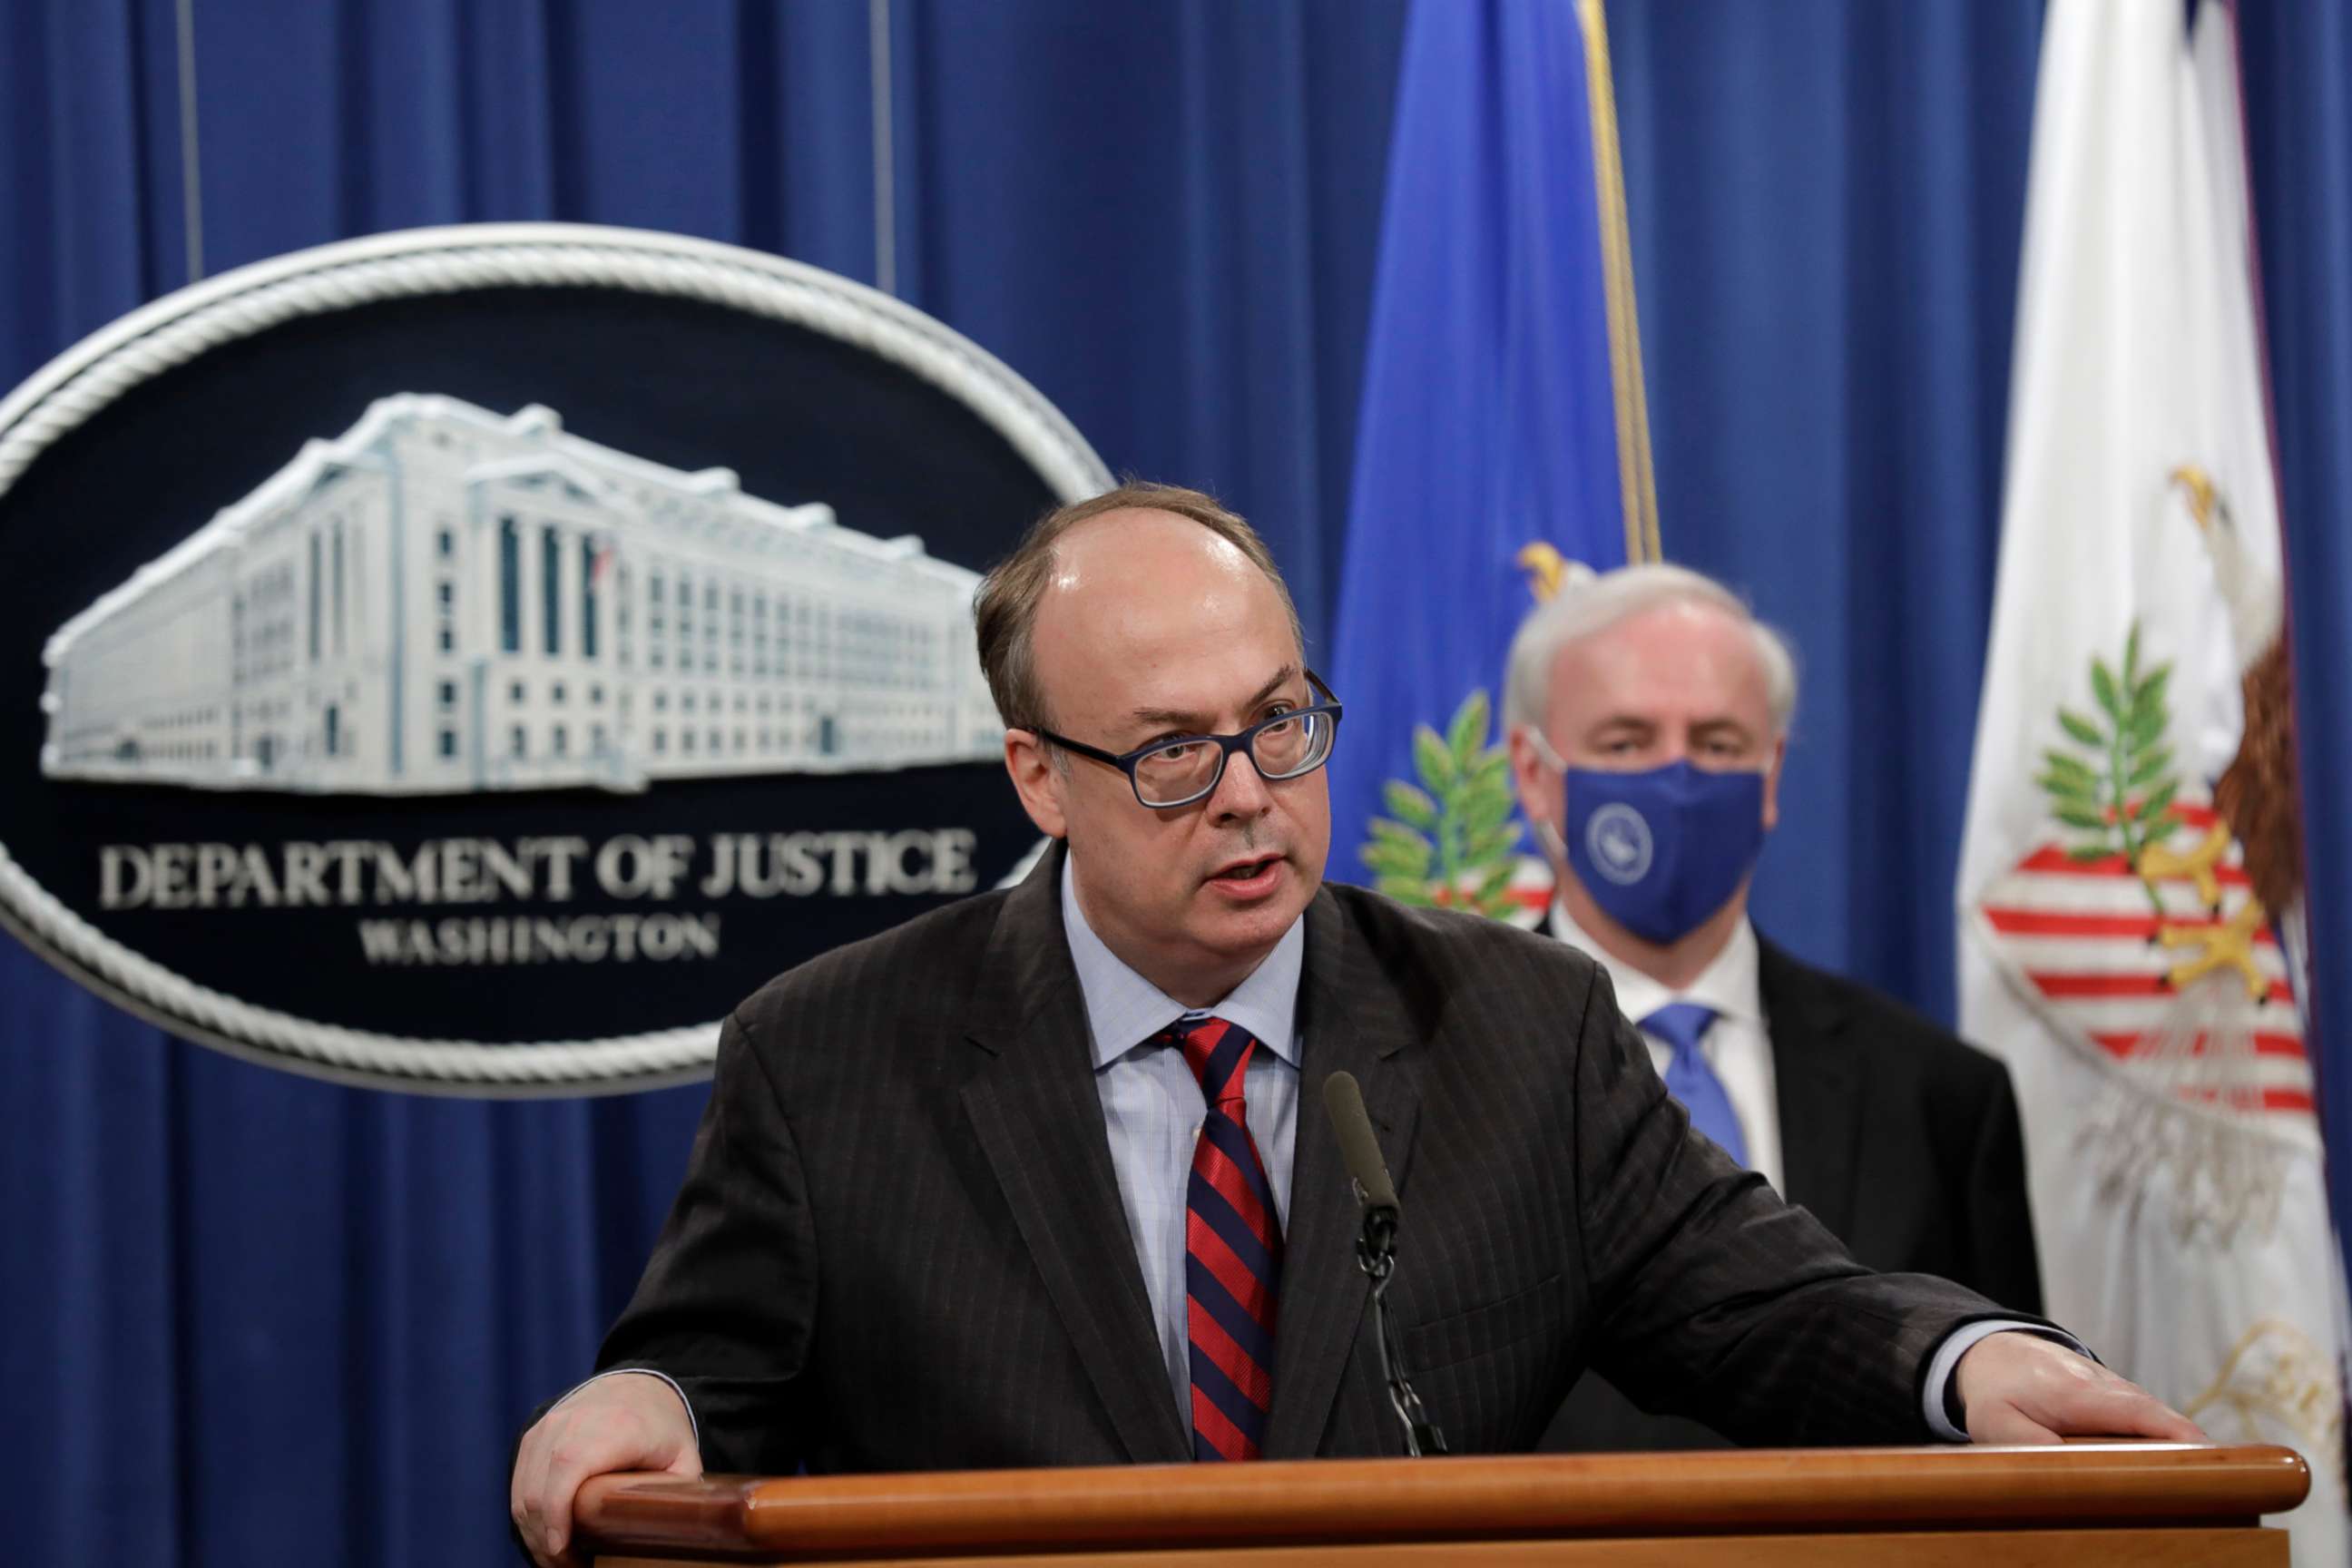 PHOTO: In this Oct. 21, 2020, file photo, Jeffrey Clark, acting assistant attorney general, left, speaks beside Jeffrey Rosen, deputy attorney general, during a news conference at the Department of Justice in Washington, D.C.